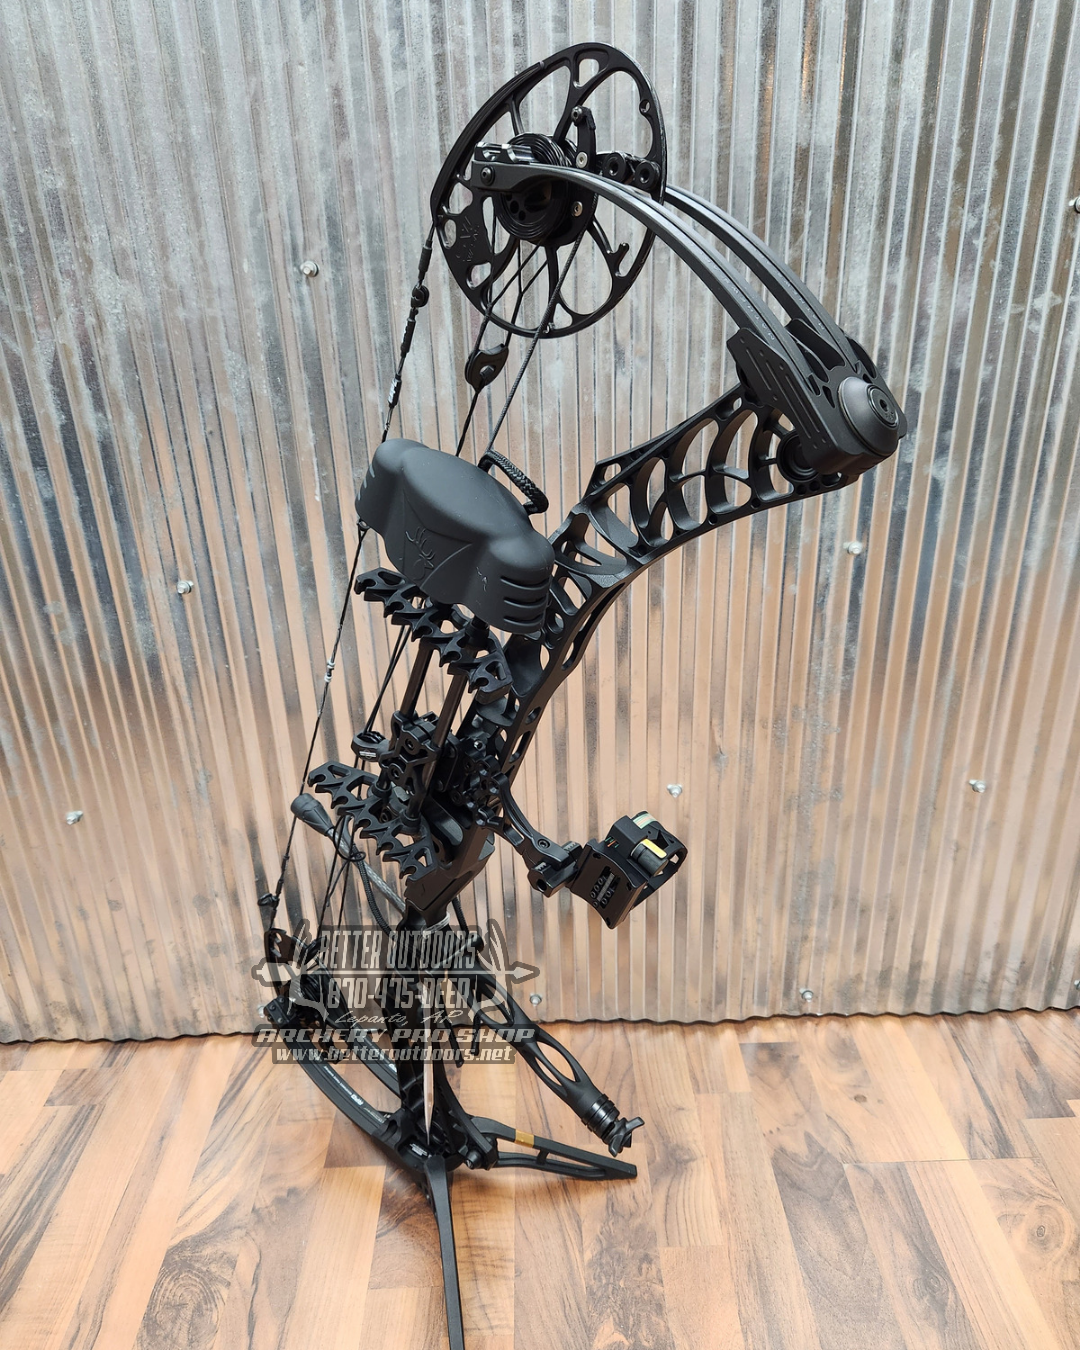 The NEW Mathews are HERE… The Phase 4 - Michiana Archery